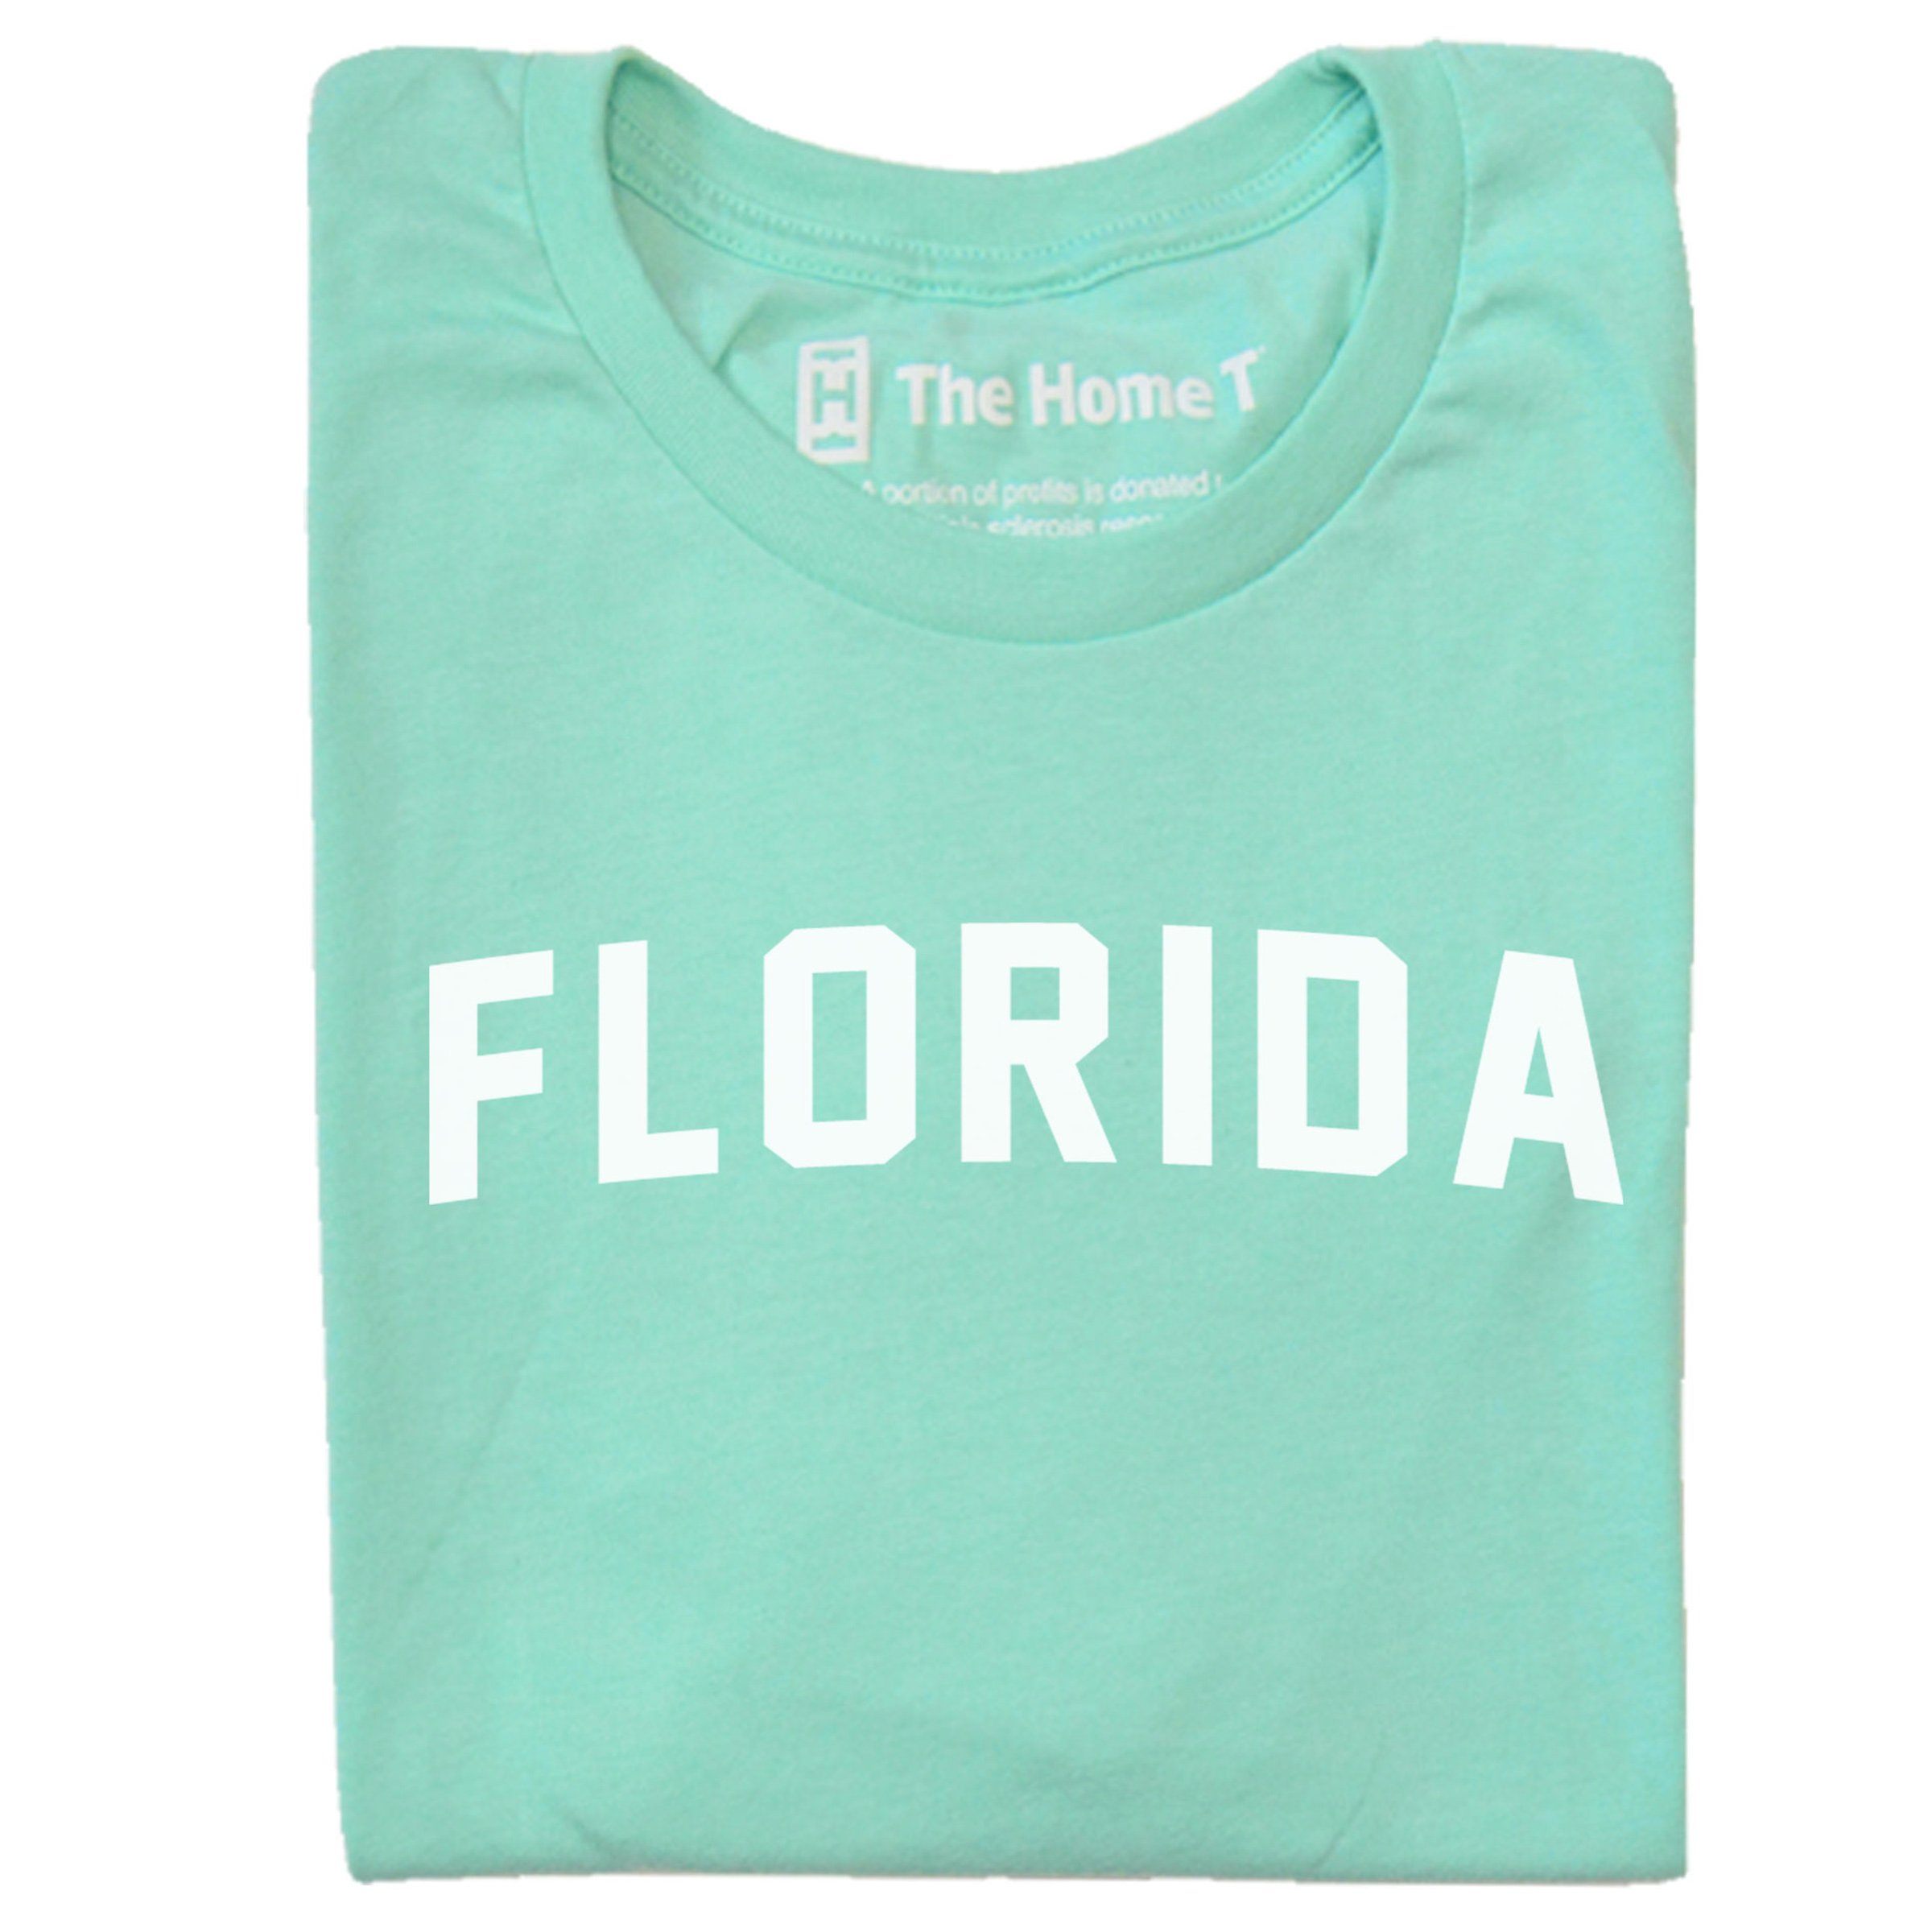 Florida Arched The Home T XS Mint